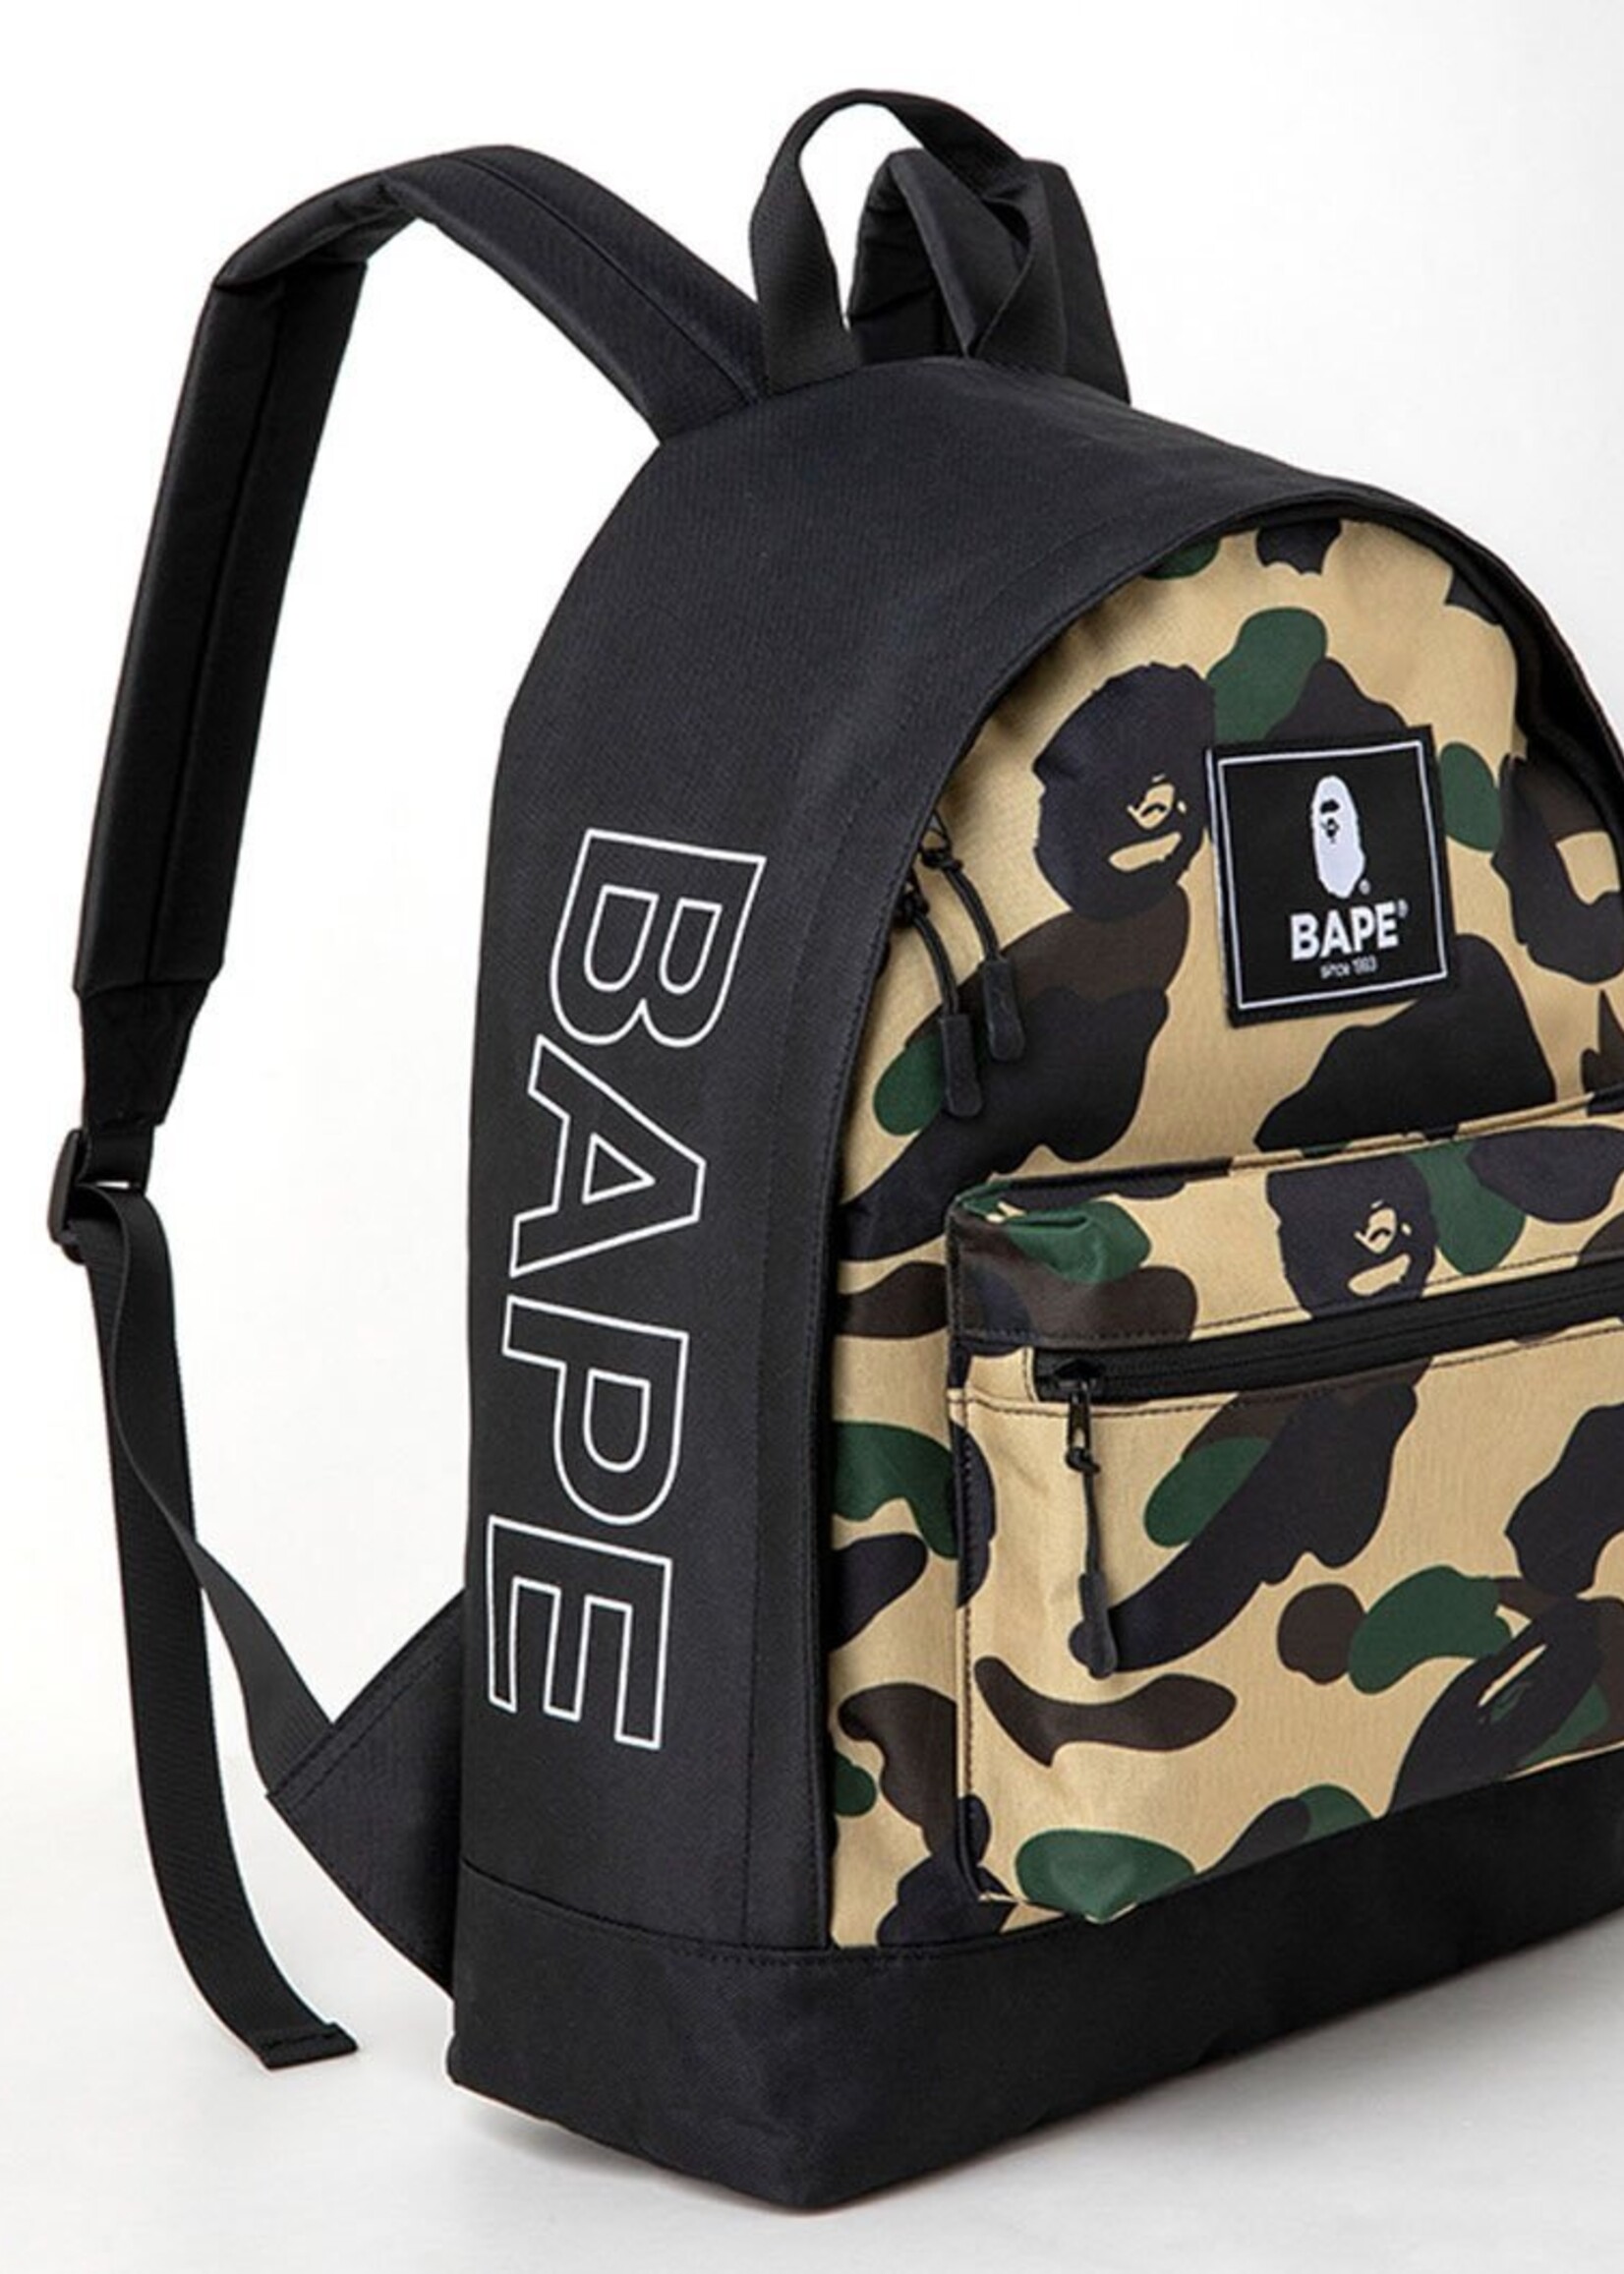 pink camo バックパック a bathing ape BAPE backpack リュック エイプ